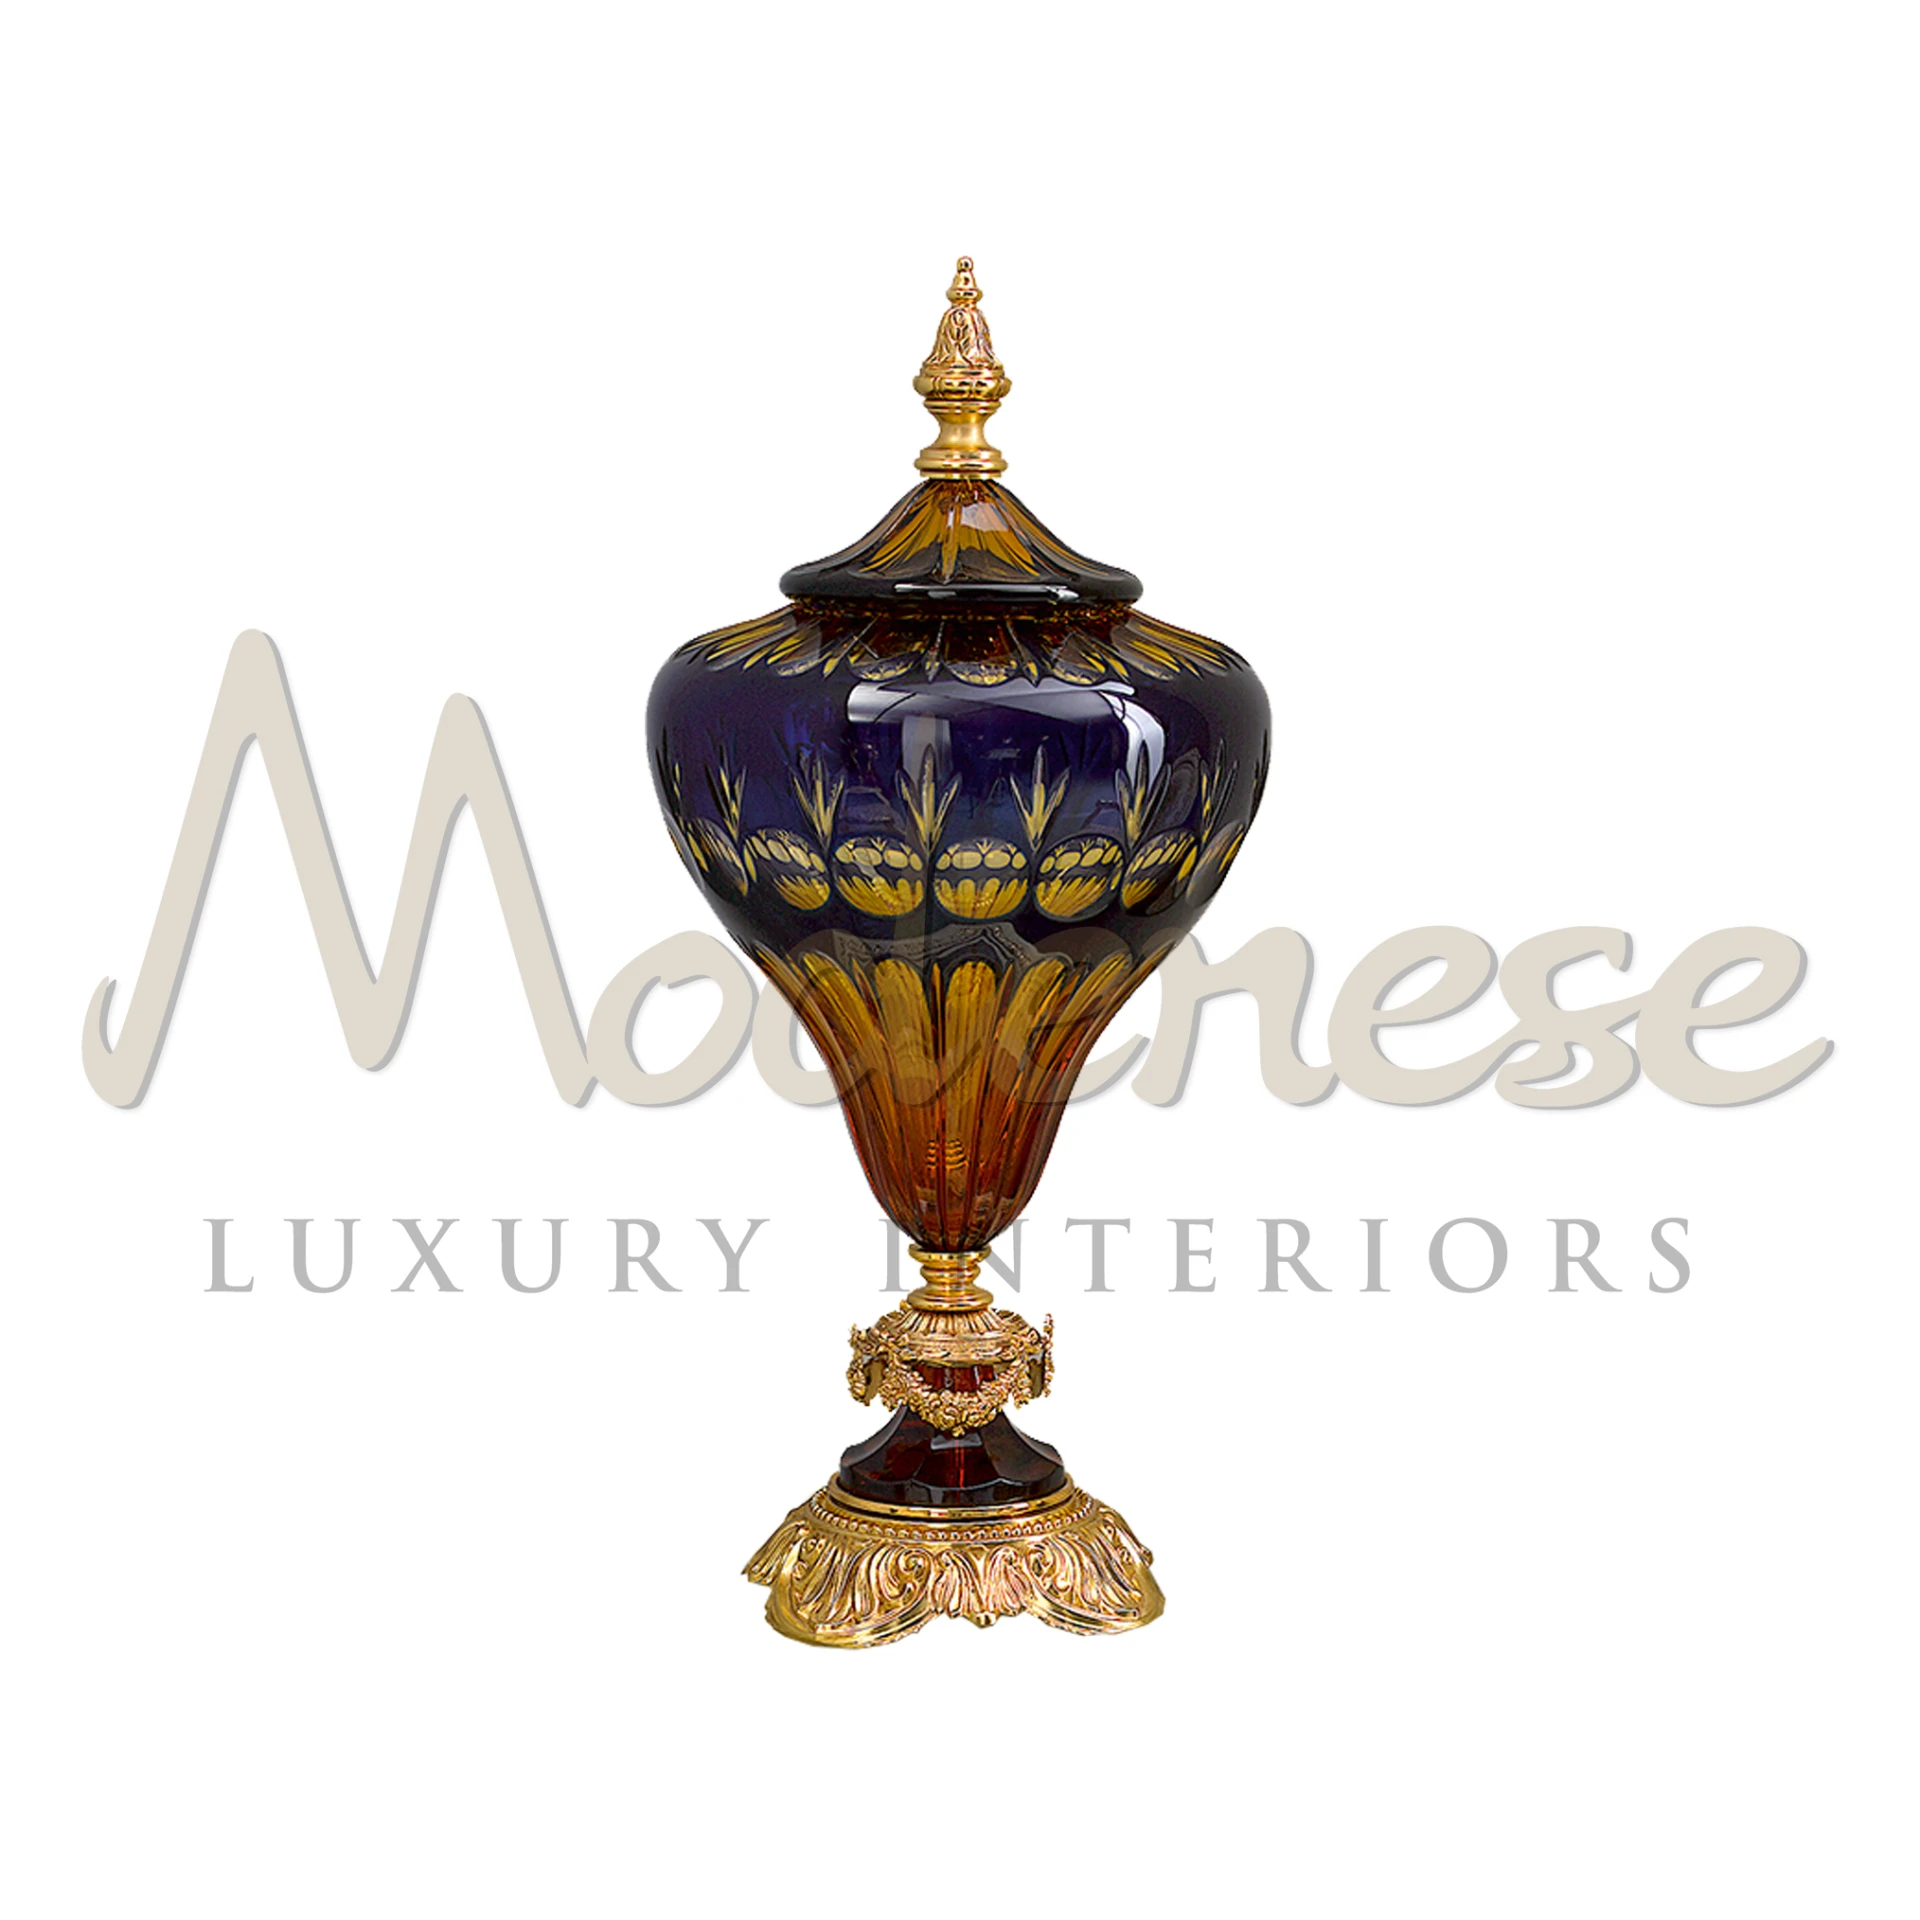 Classic amphora vase, a symbol of ancient elegance, perfect for luxury interior design with its timeless style.